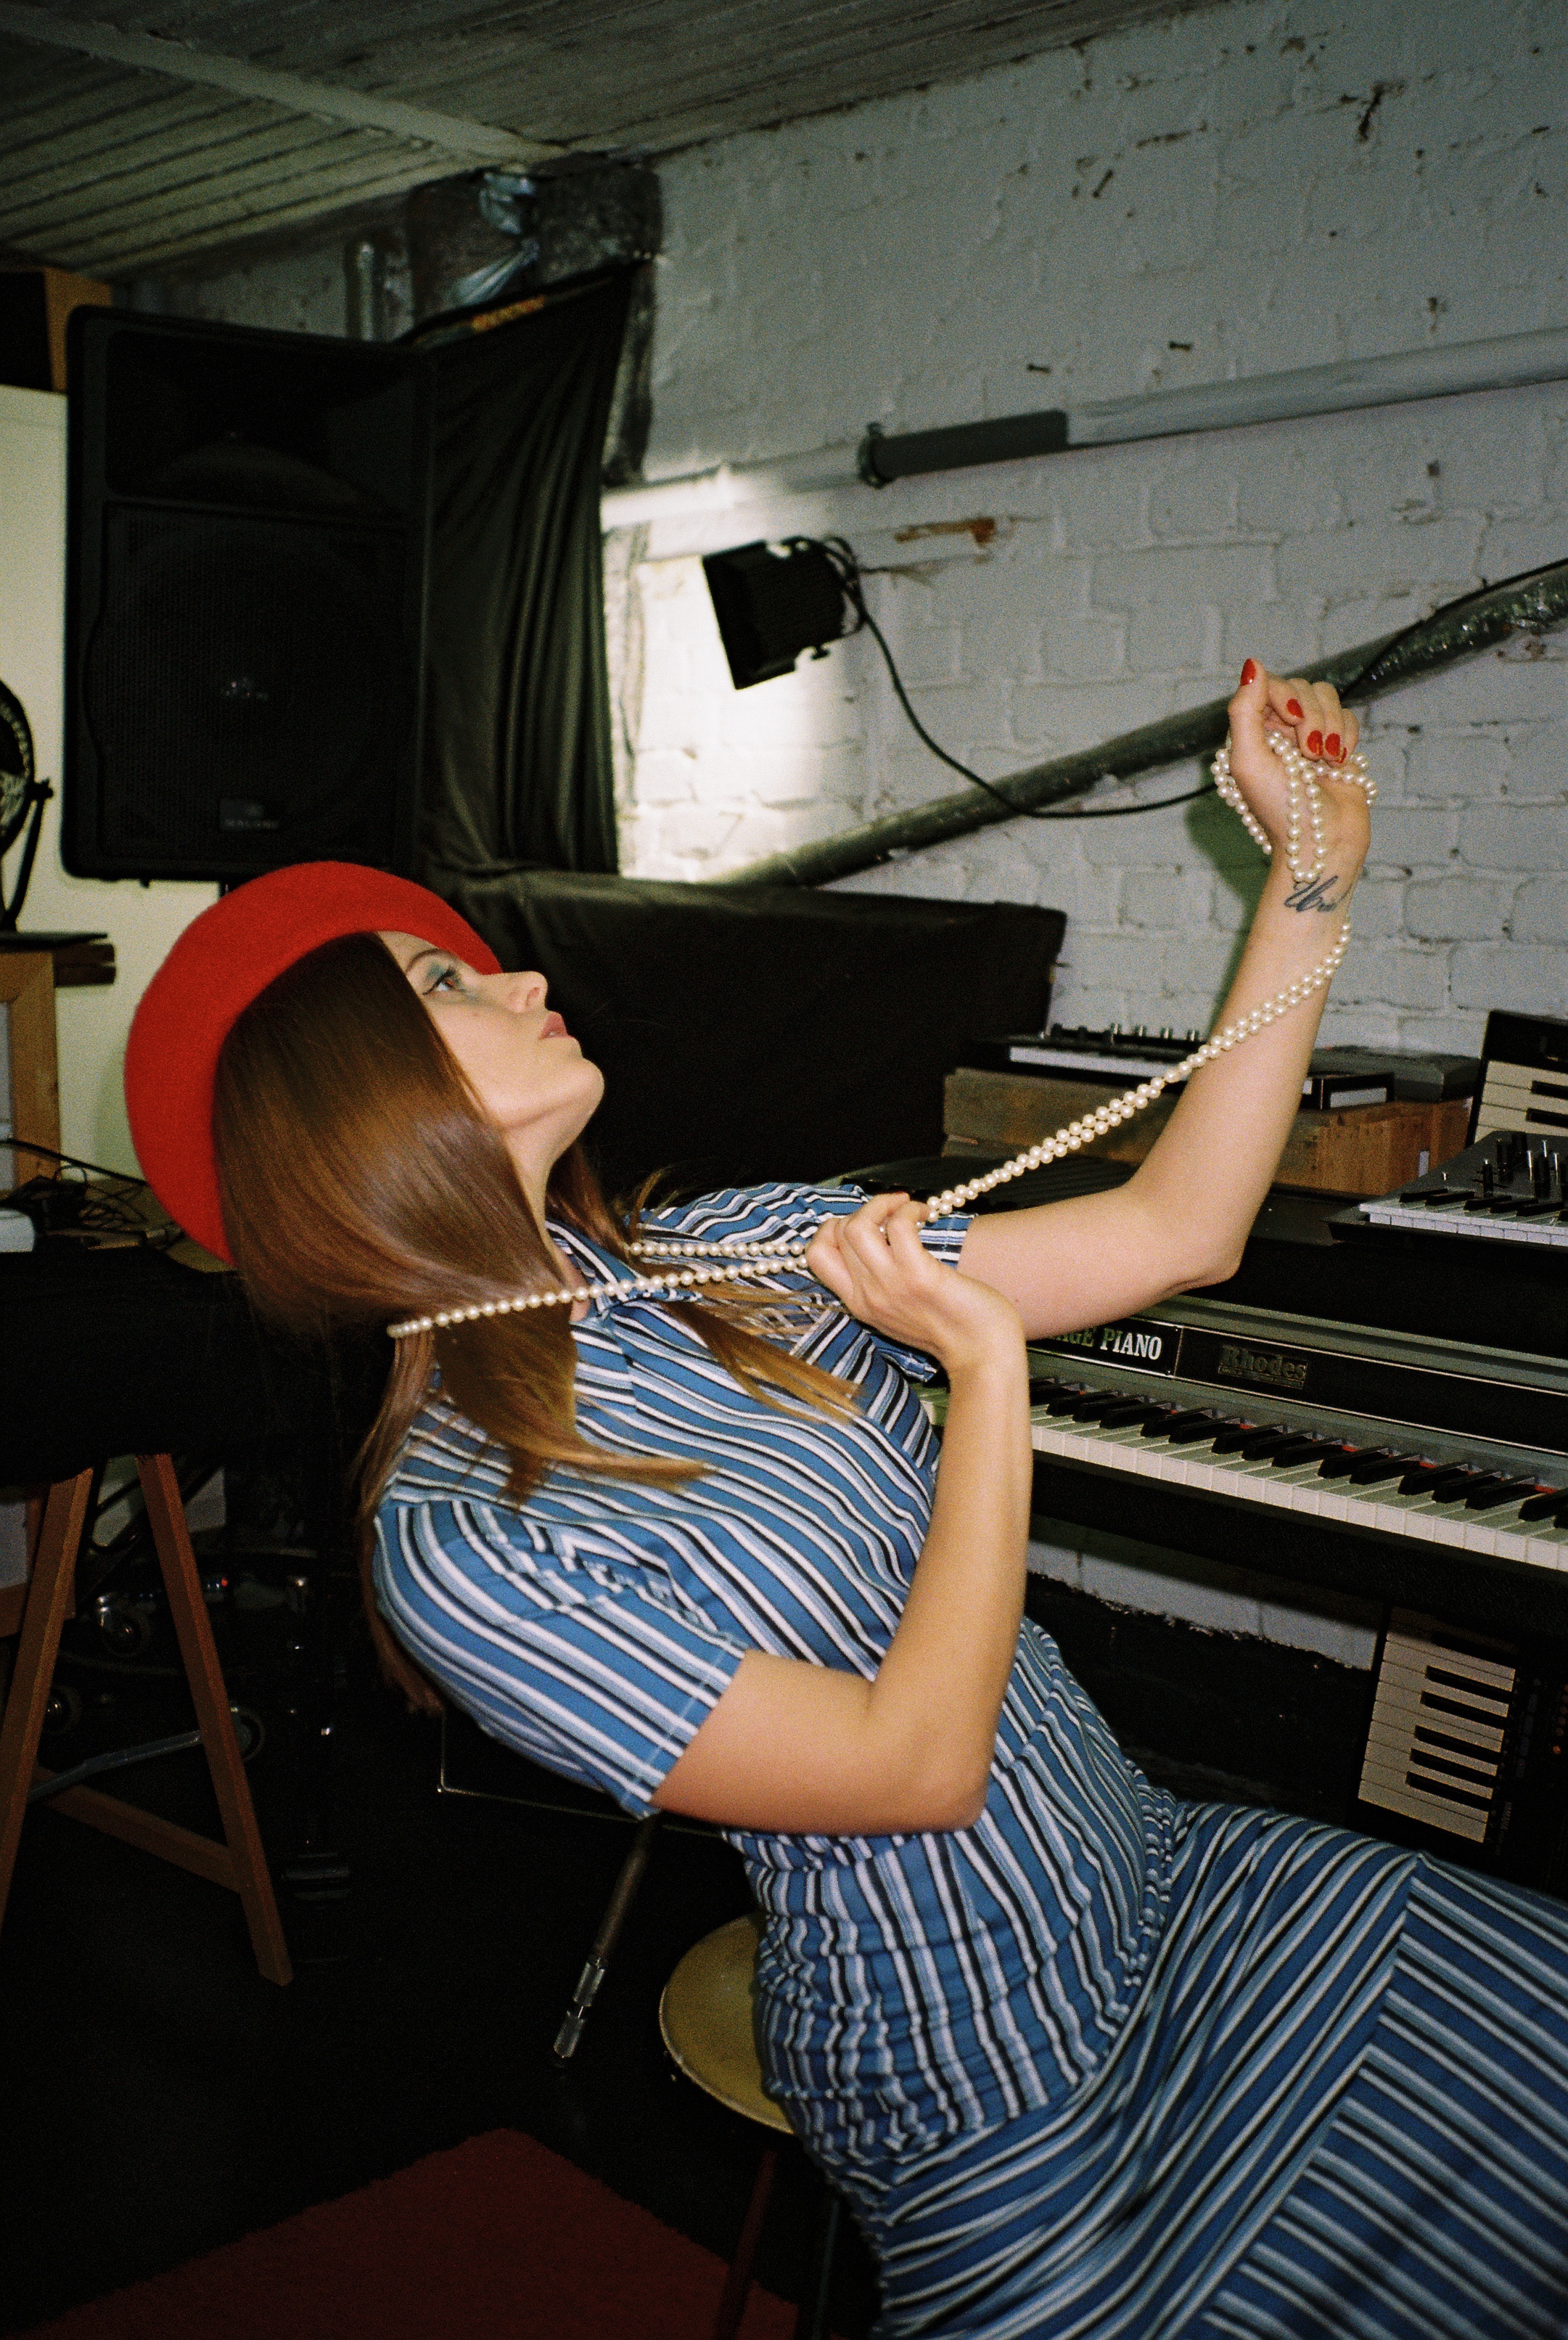 Ati wearing a striped set and red beret, holding out a string of pearls around her neck